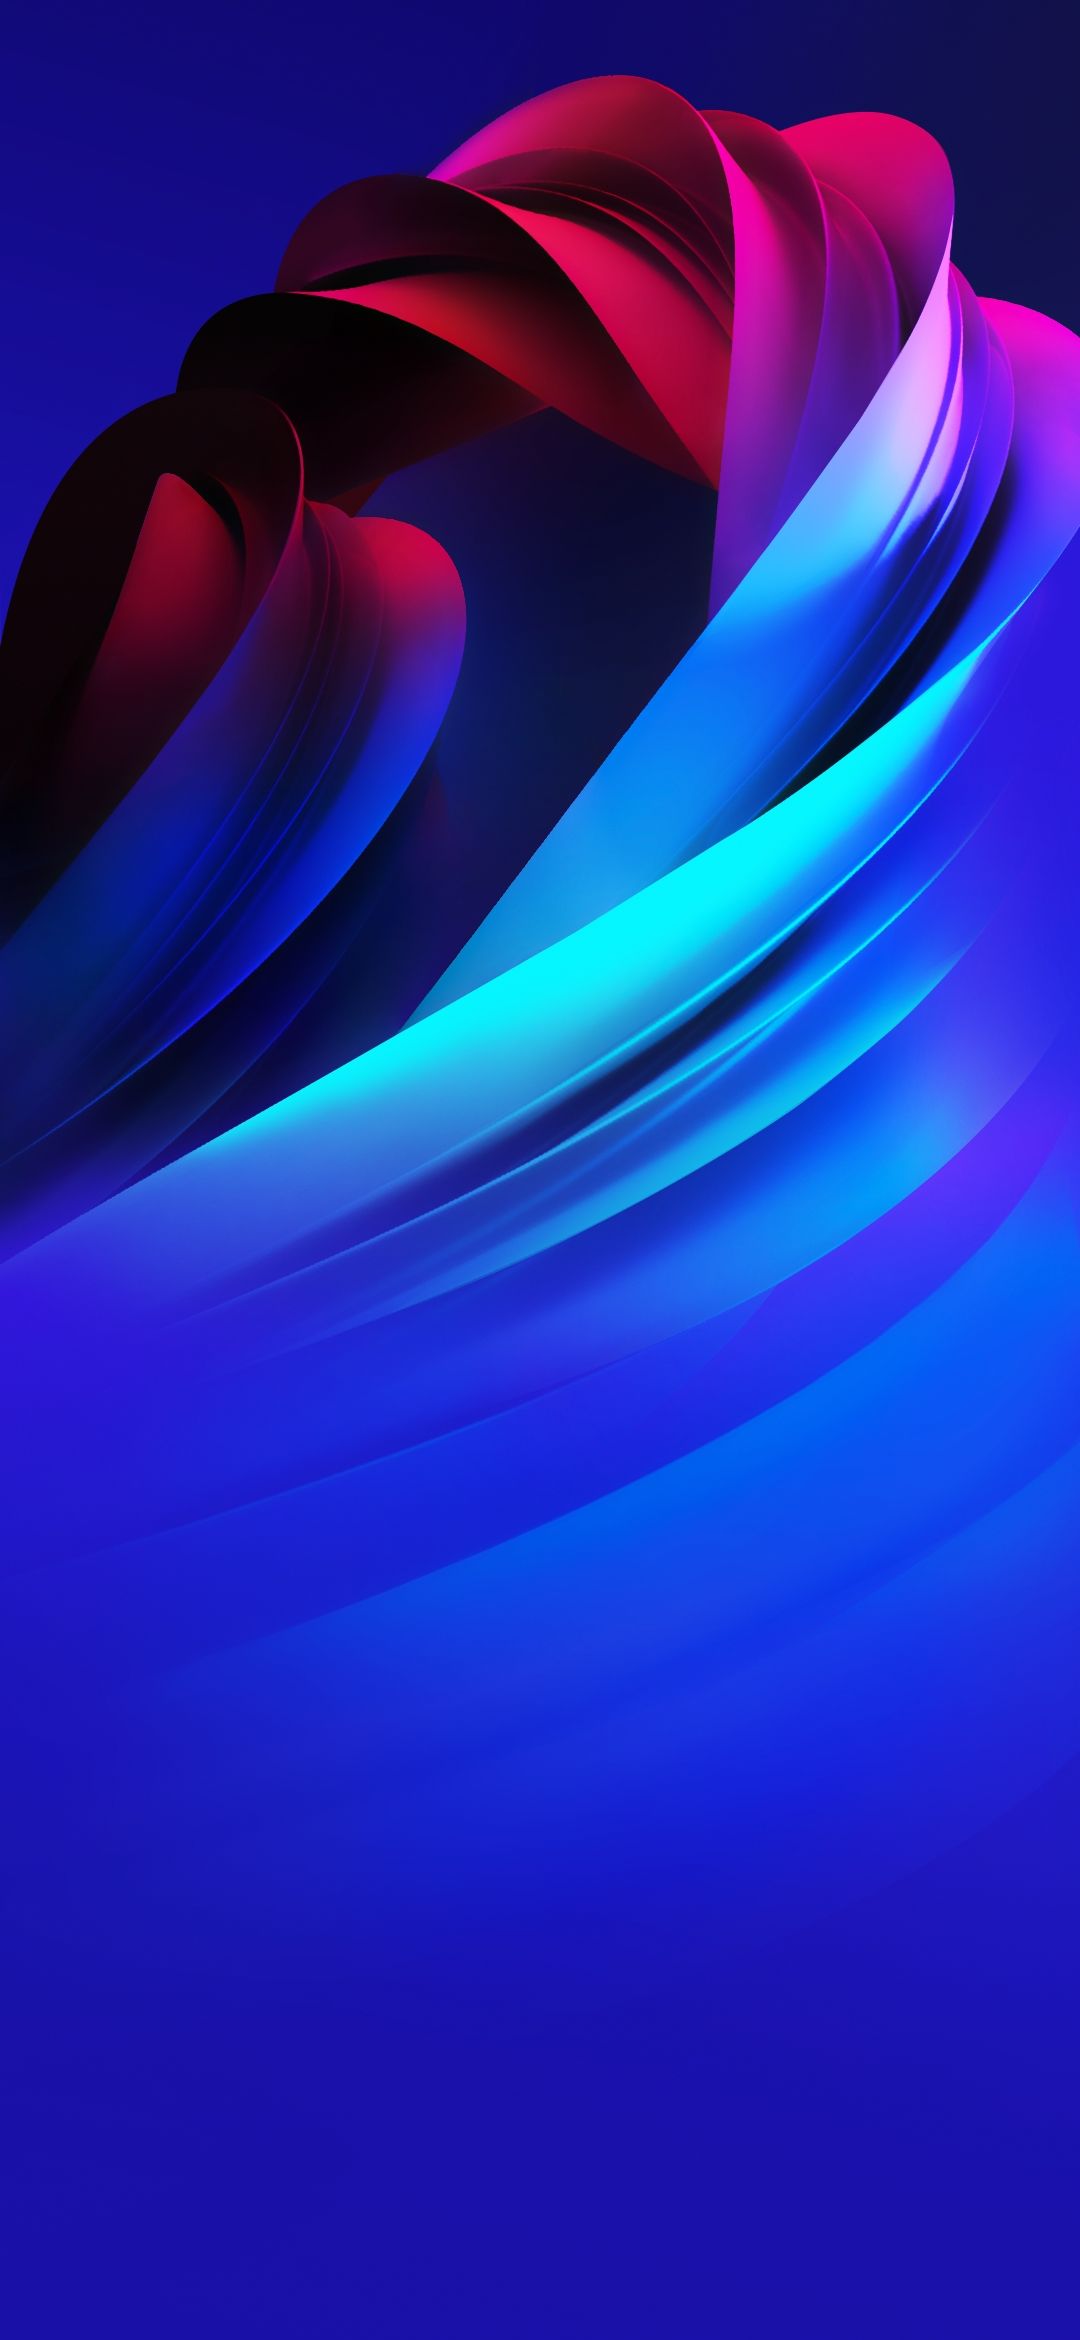 MIUI 11 Wallpaper : Free Download, Borrow, and Streaming : Internet Archive